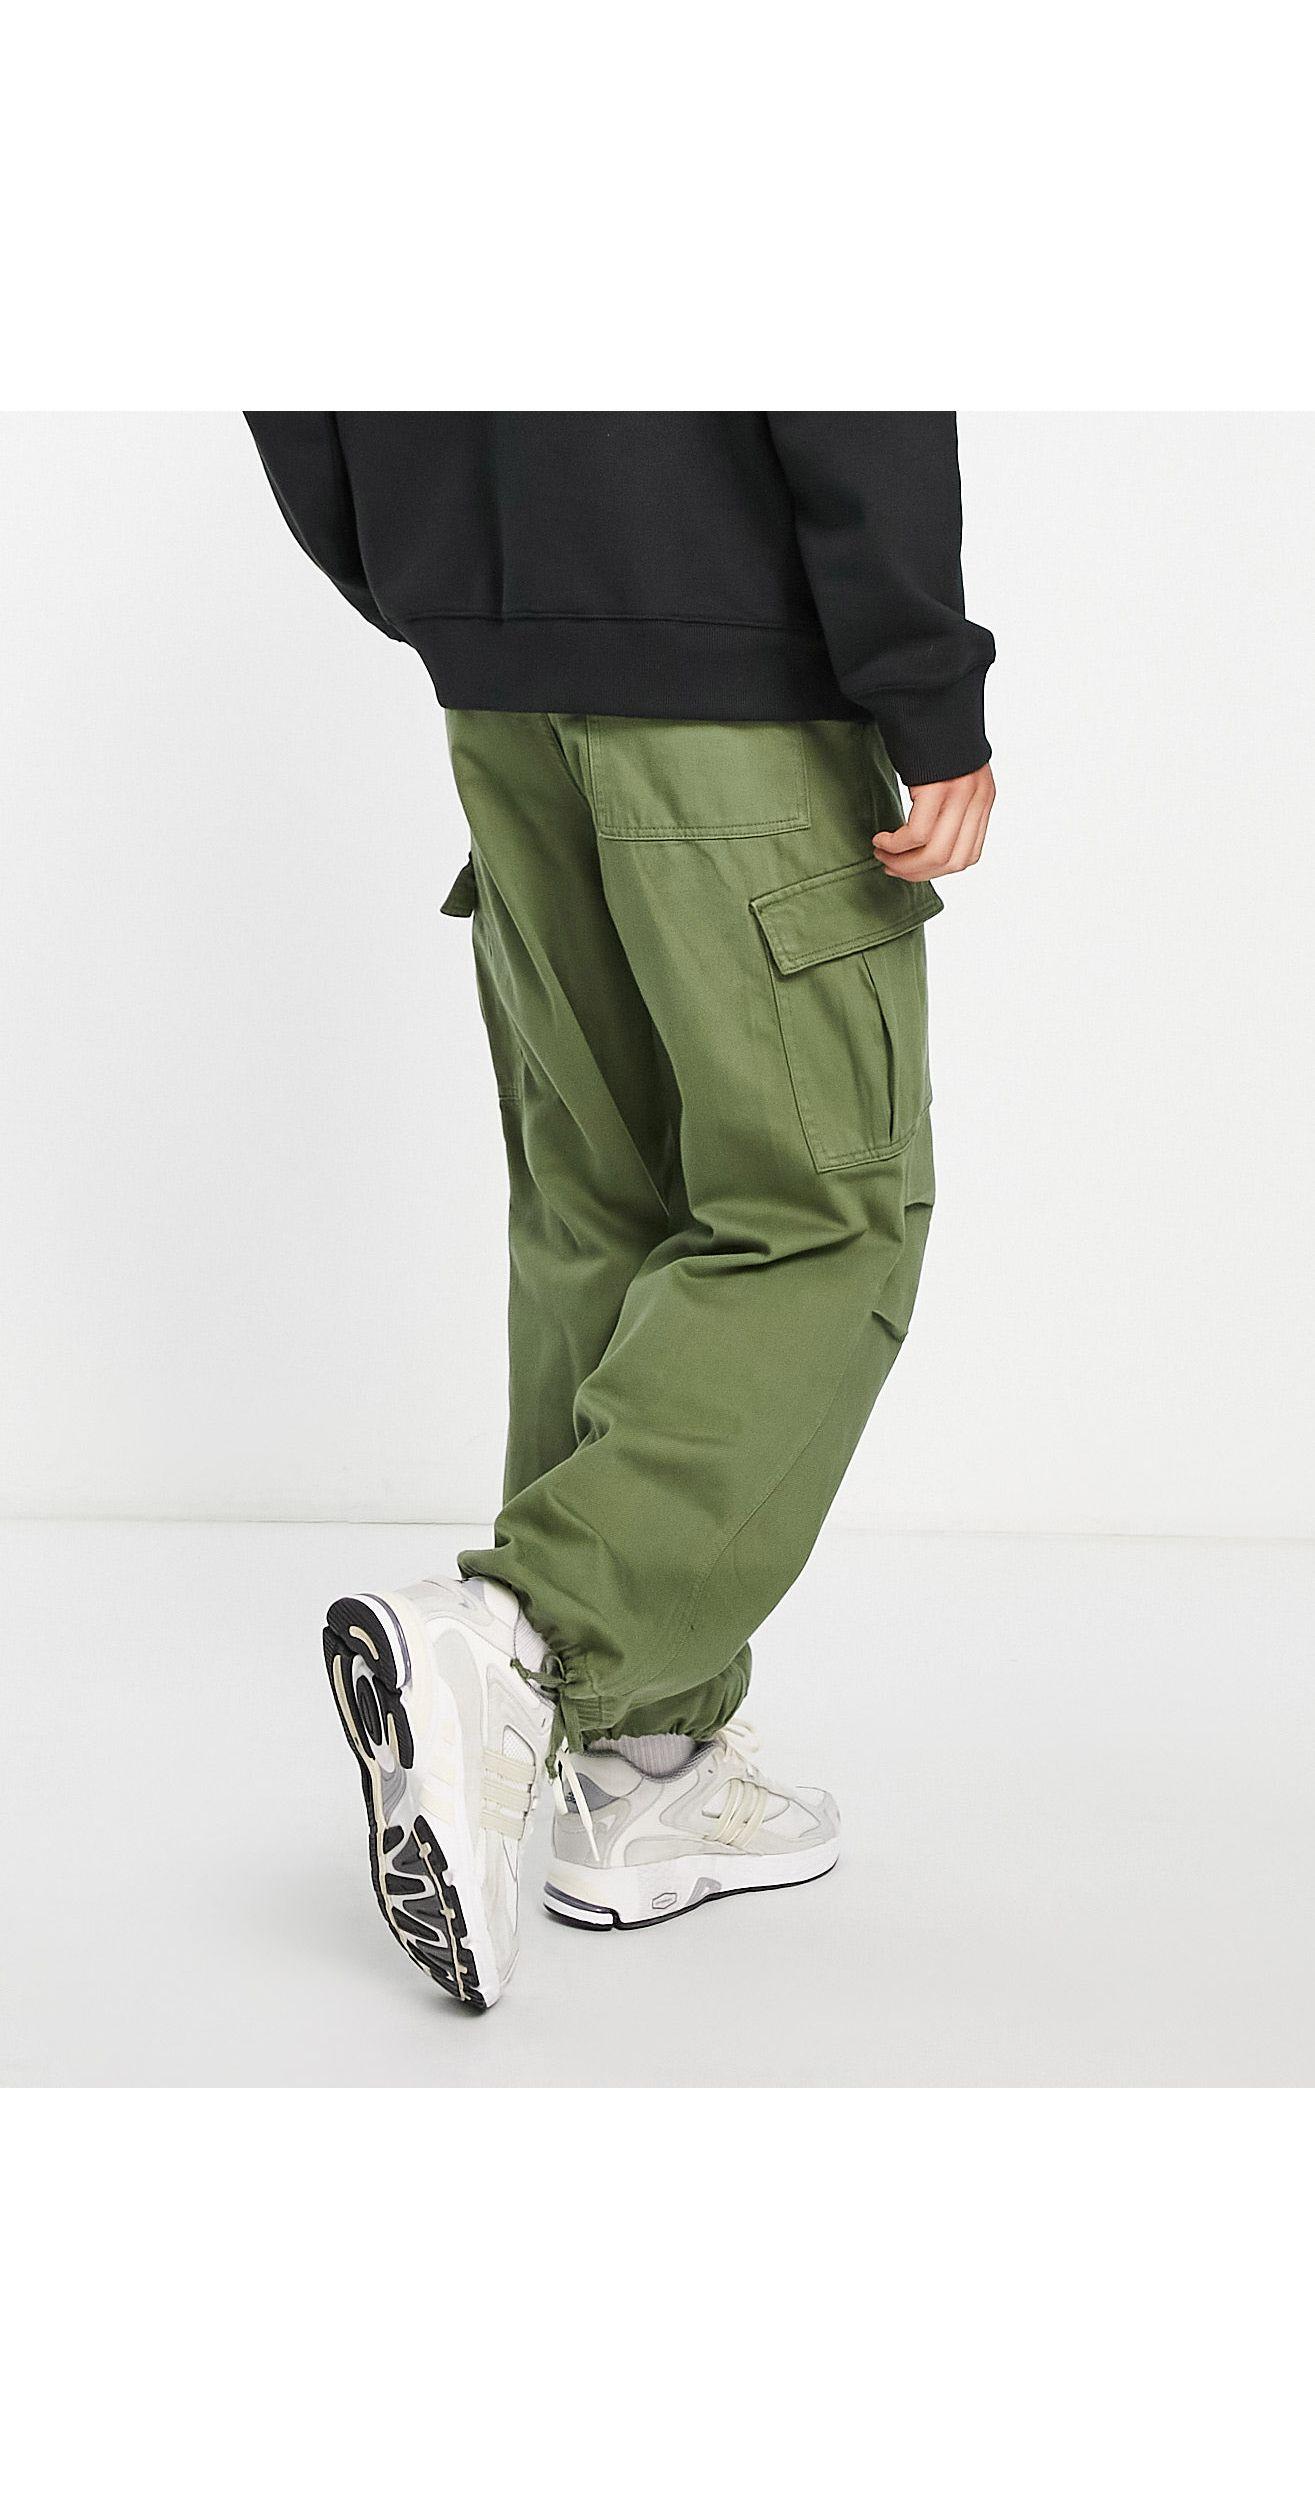 Bershka parachute cargo trousers in black  ASOS  Cargo trousers Latest  fashion clothes Men trousers